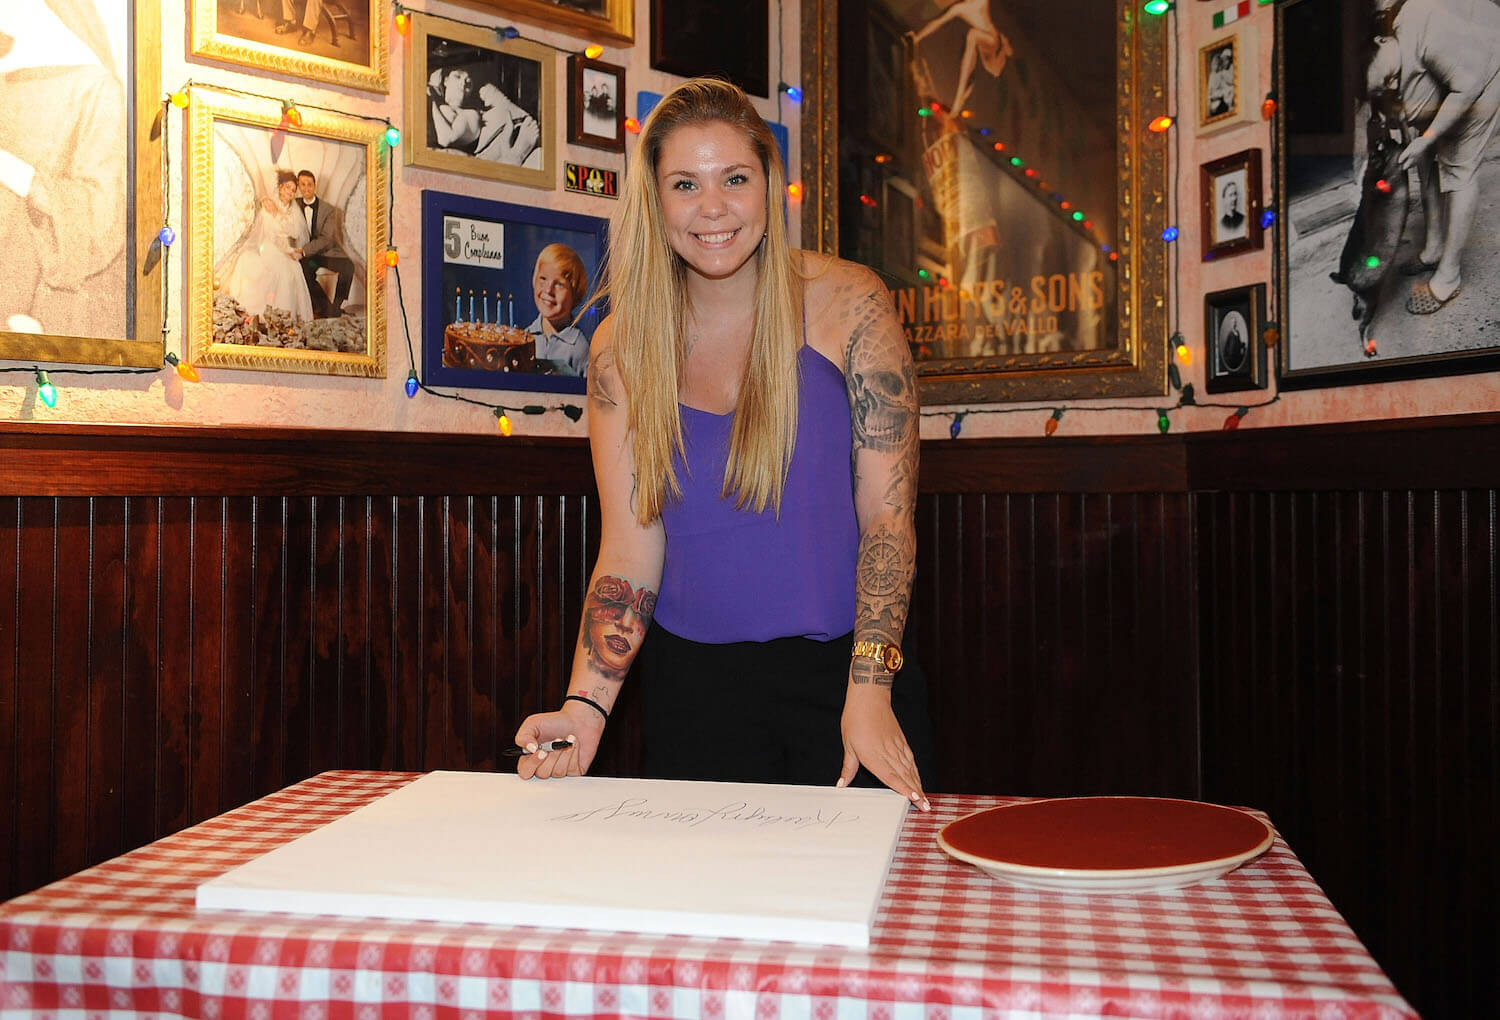 'Teen Mom 2' star Kailyn Lowry smiling 